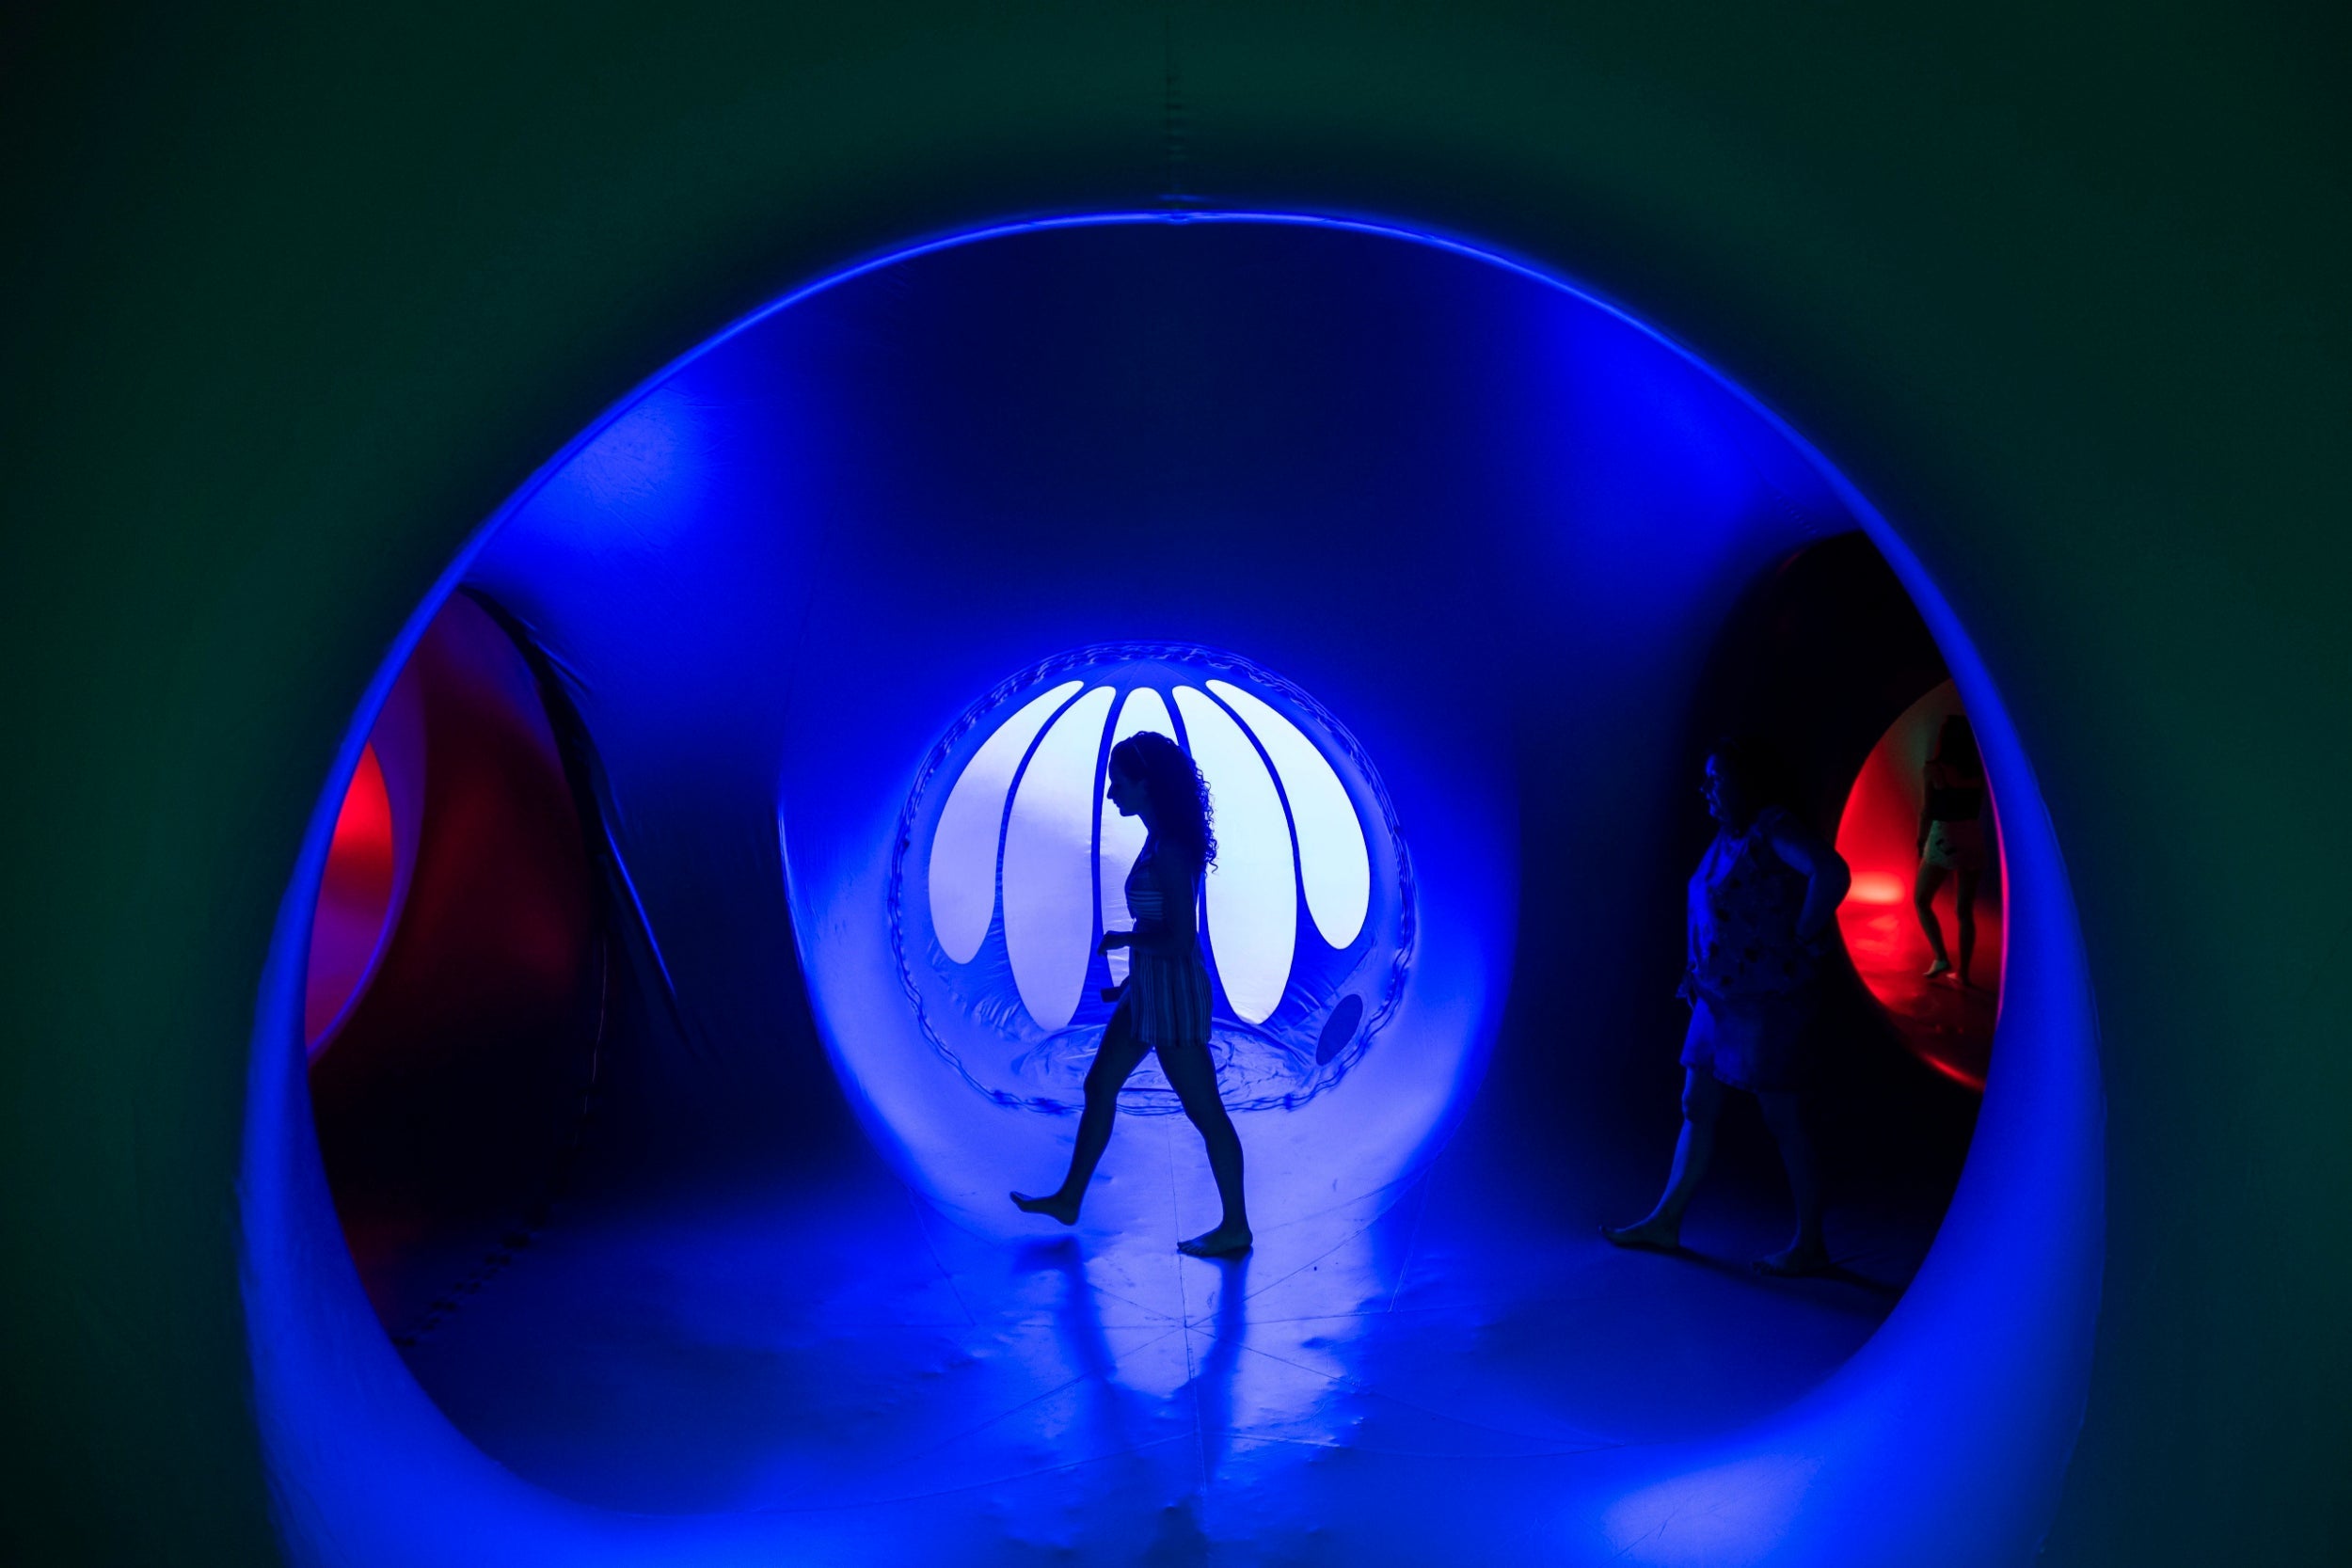 A visitor walks through an art installation at Sziget Festival in Budapest